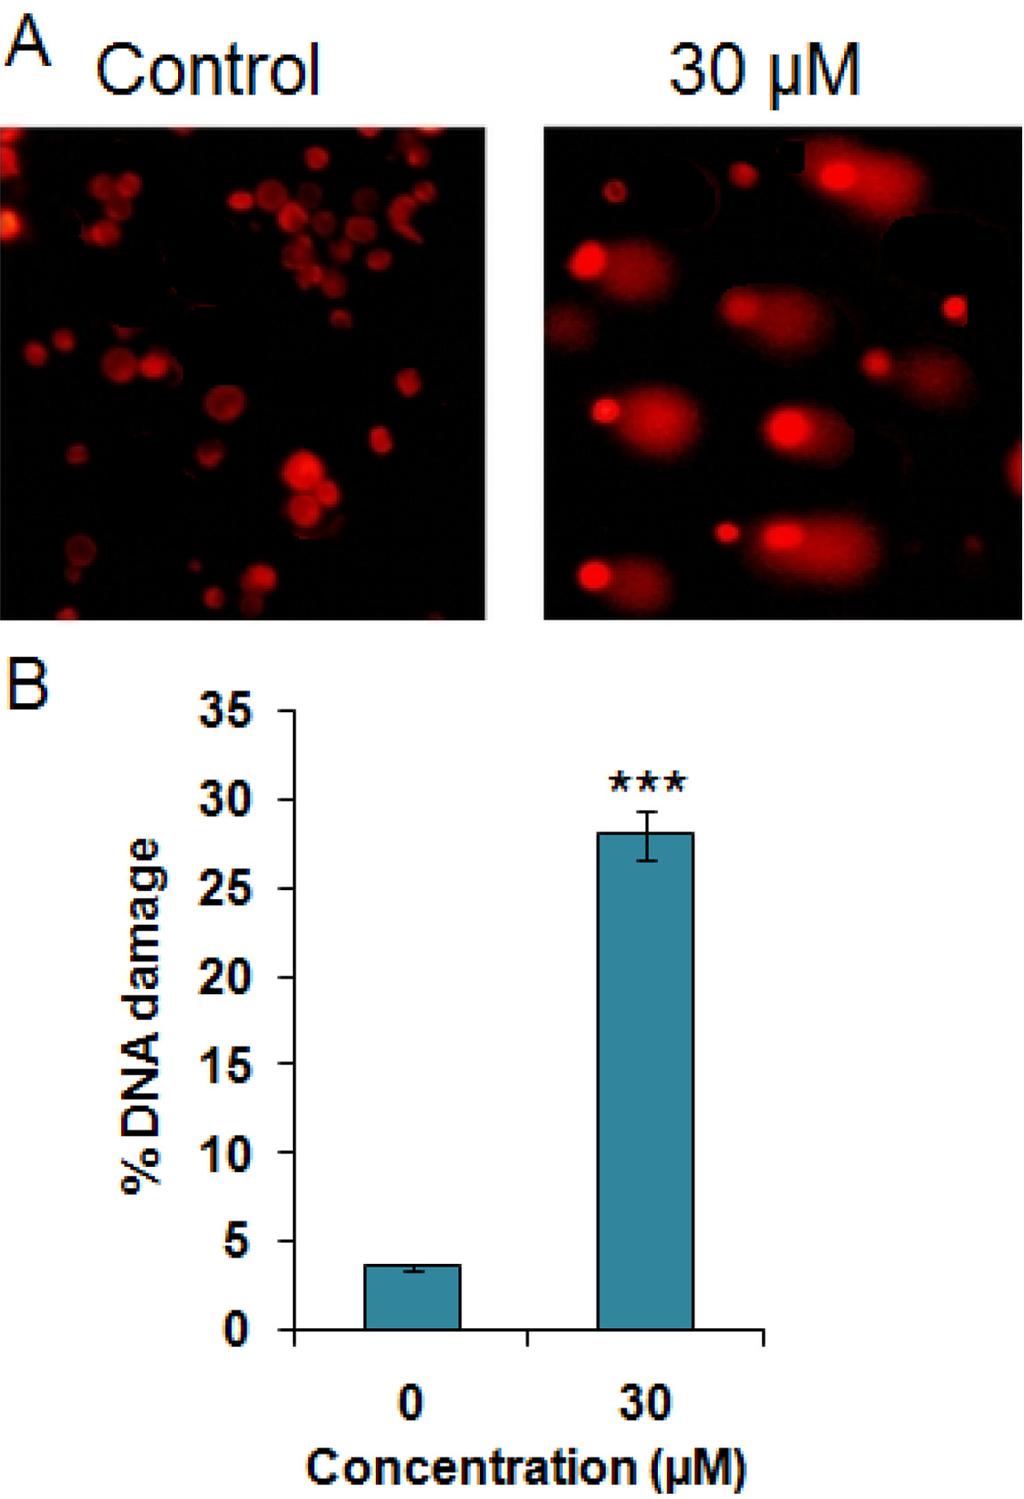 350 Figure 7. Induction of DNA damage in Colo-205 cells at IC 50 concentrations of geraniol as indicated by (A) Comet assay and (B) quantification of % DNA damage.